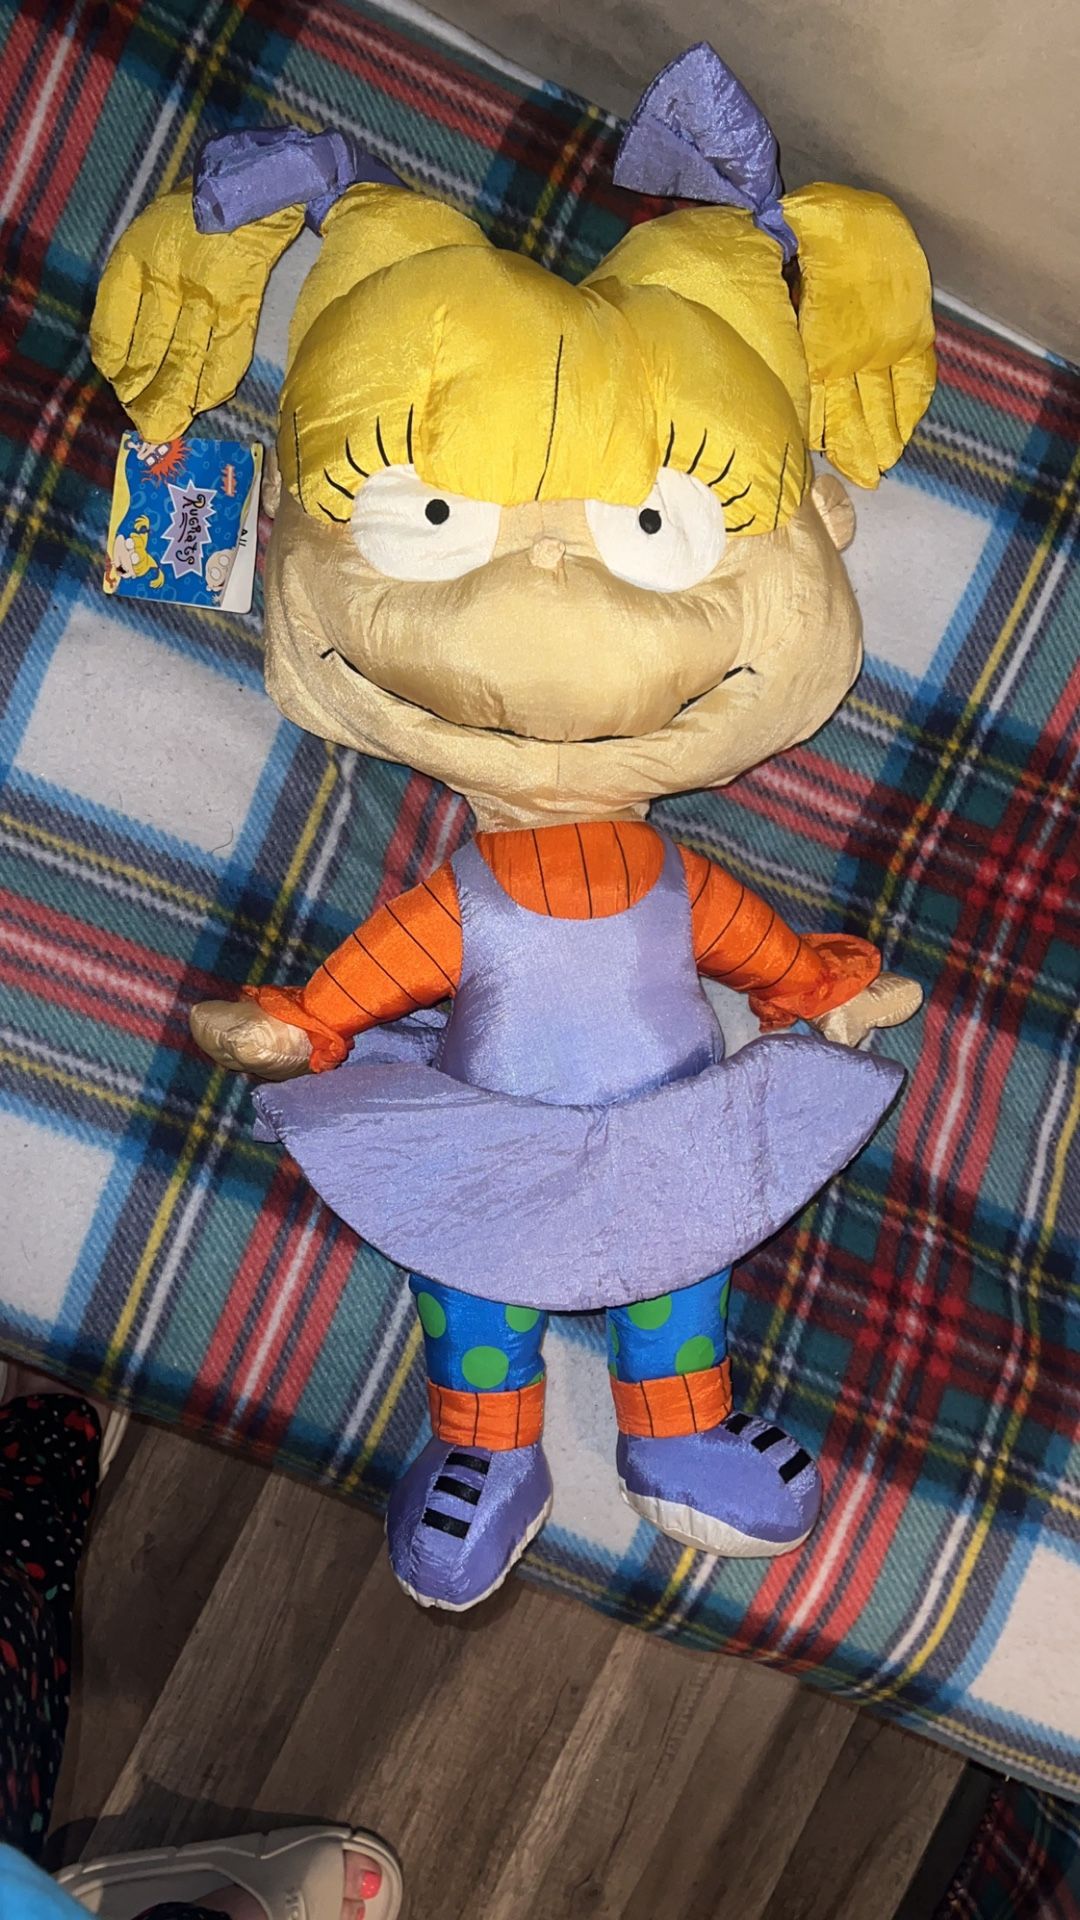 Vtg 1998 Nickelodeon Rugrats Angelica 21" Play-by-play Nylon Parachute